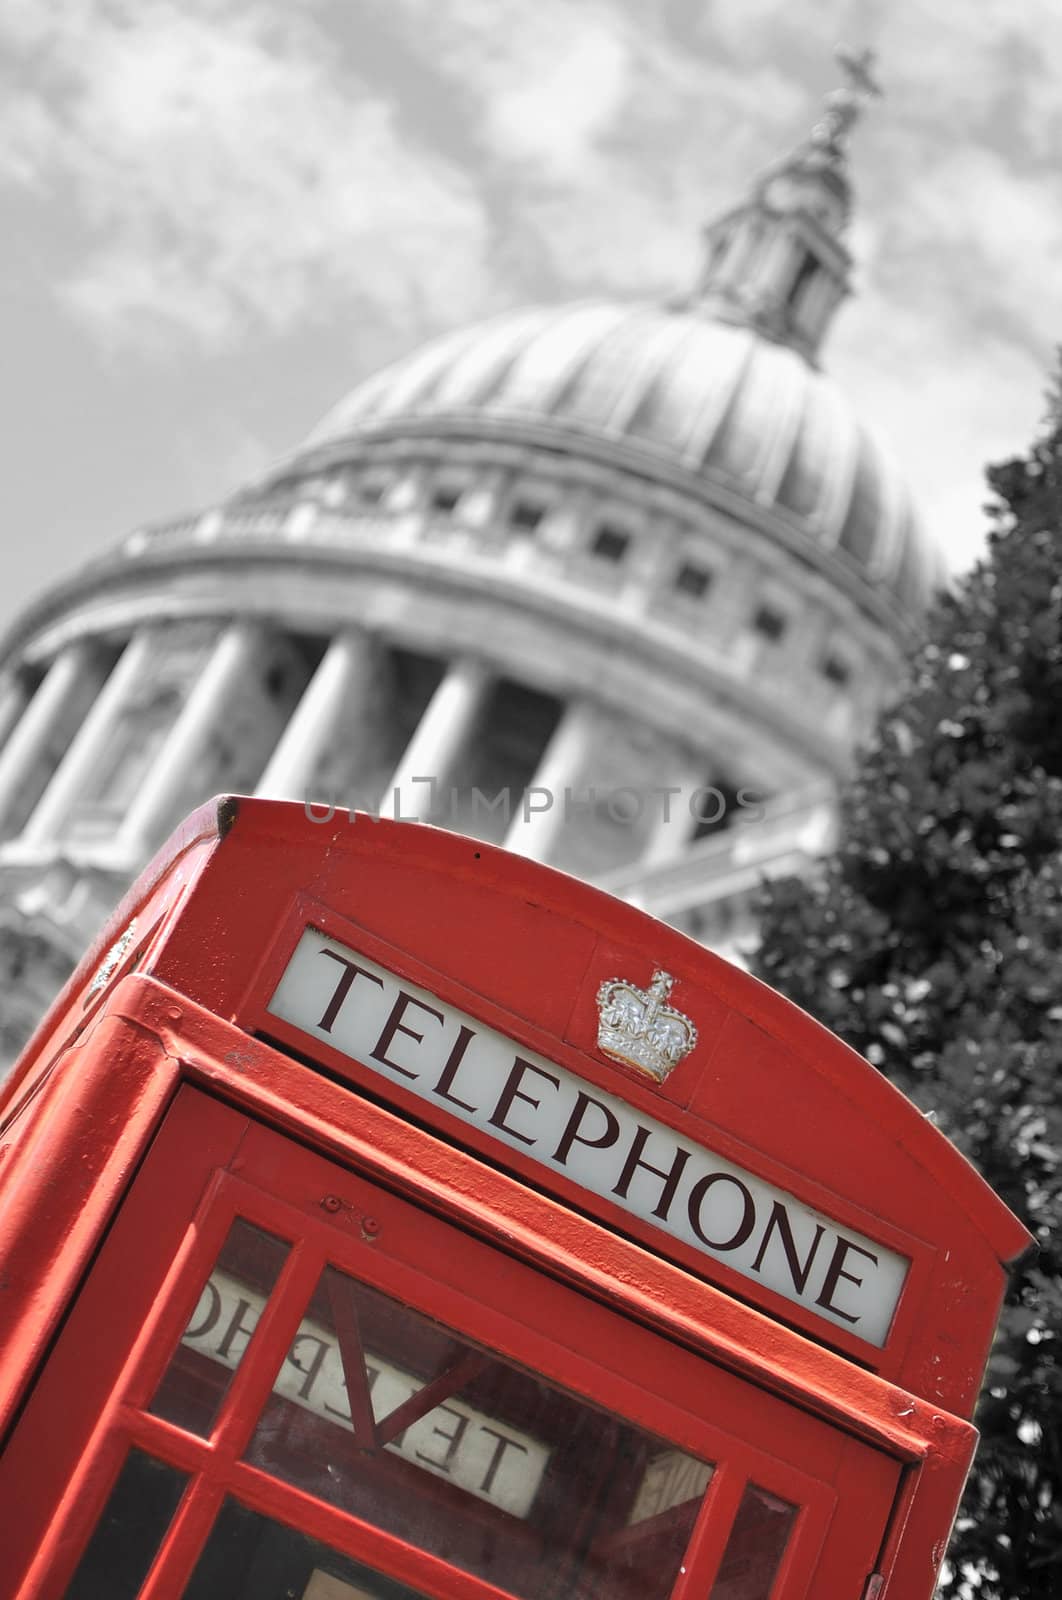 London red phone box with St Paul's in the background